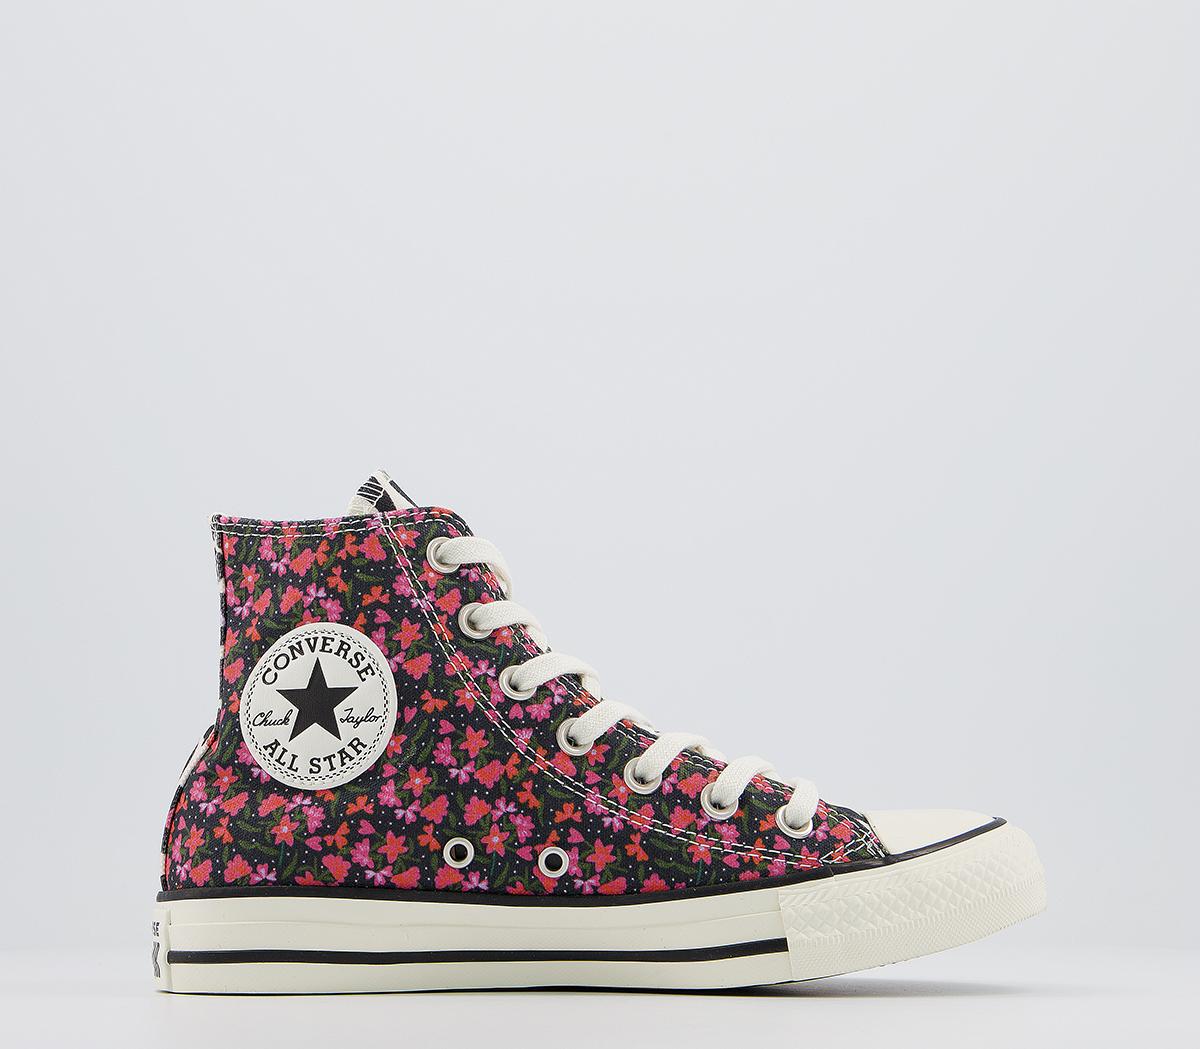 ConverseConverse All Star Hi TrainersPink Green Multi Floral